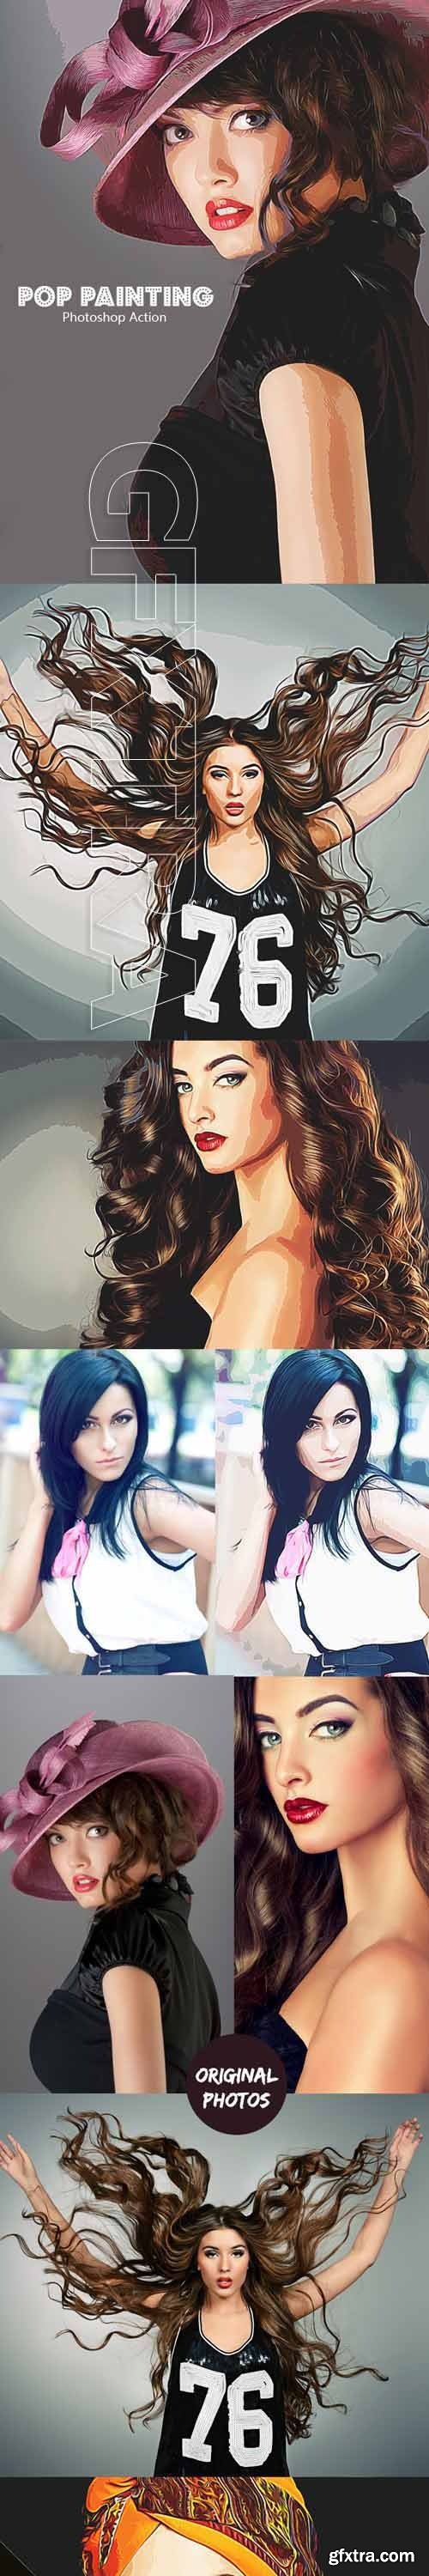 GraphicRiver - Pop Painting - Photoshop Action 20658529